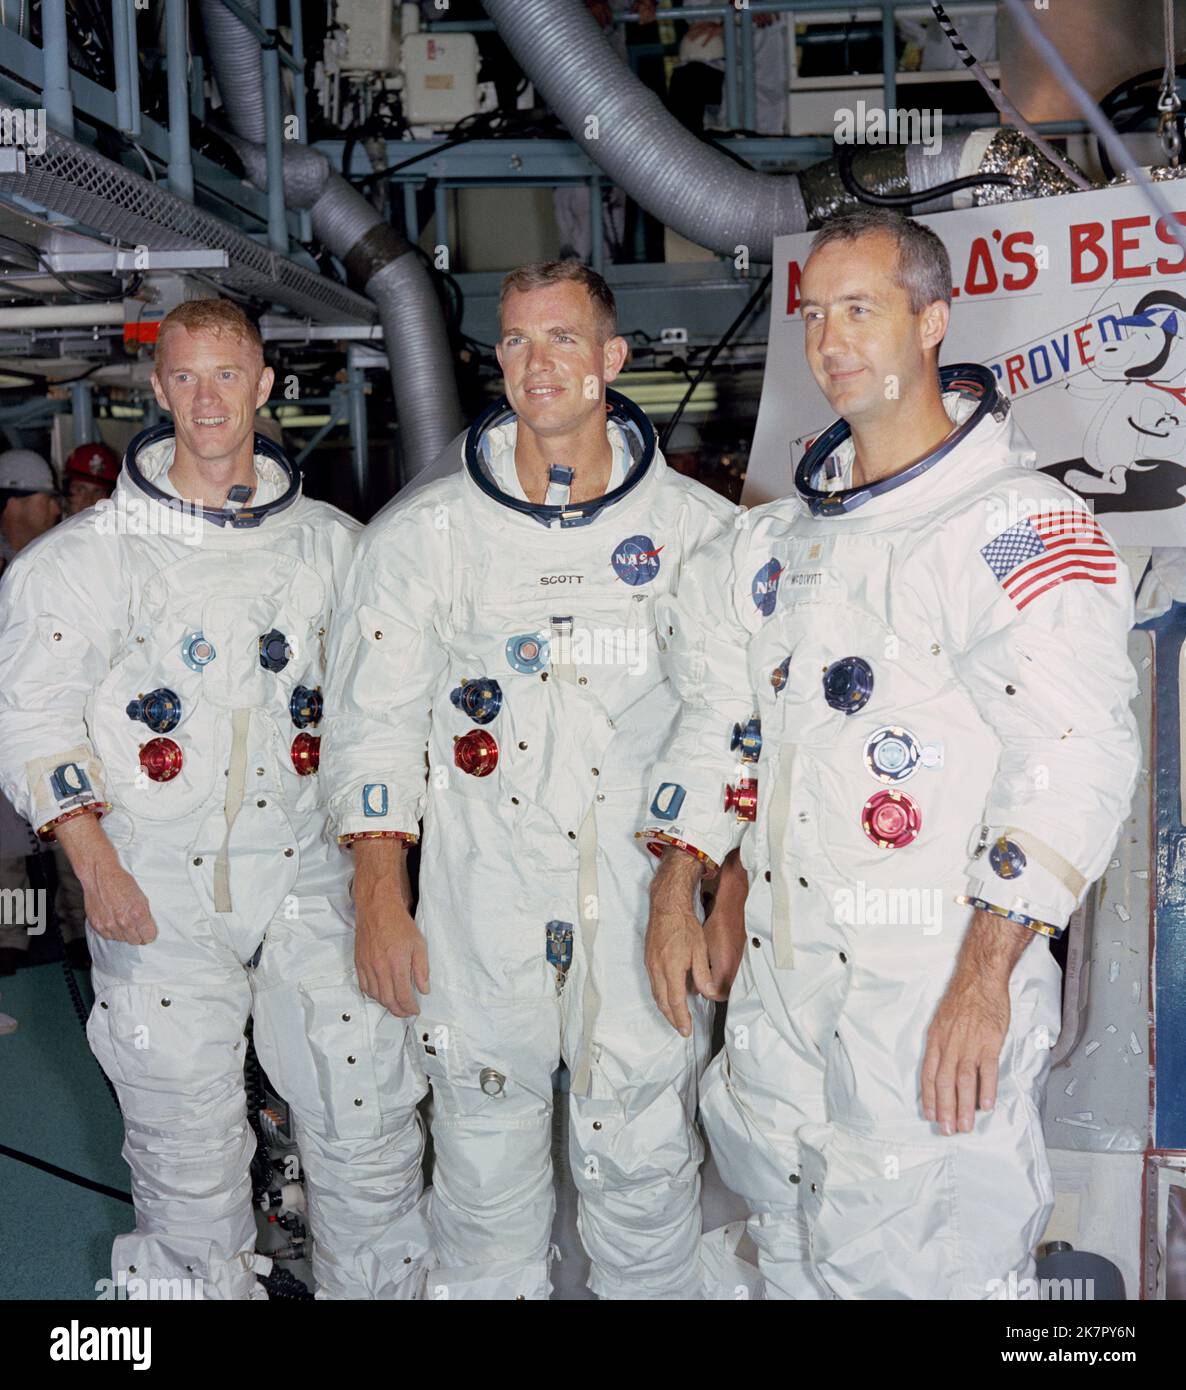 Cape Canaveral, United States. 18th Oct, 2022. NASA Apollo 9 prime crew astronauts, left to right, Russell Schweickart, David Scott, and James McDivitt pose by the Apollo Command Module 103 during training at the Kennedy Space Center, July 19, 1968 in Cape Canaveral, Florida. McDivitt commanded the first Gemini spacewalk mission and commanded Apollo 9 during the first crewed orbital flight of a the lunar module, died October 15, 2022 at age 93. Credit: NASA/NASA/Alamy Live News Stock Photo